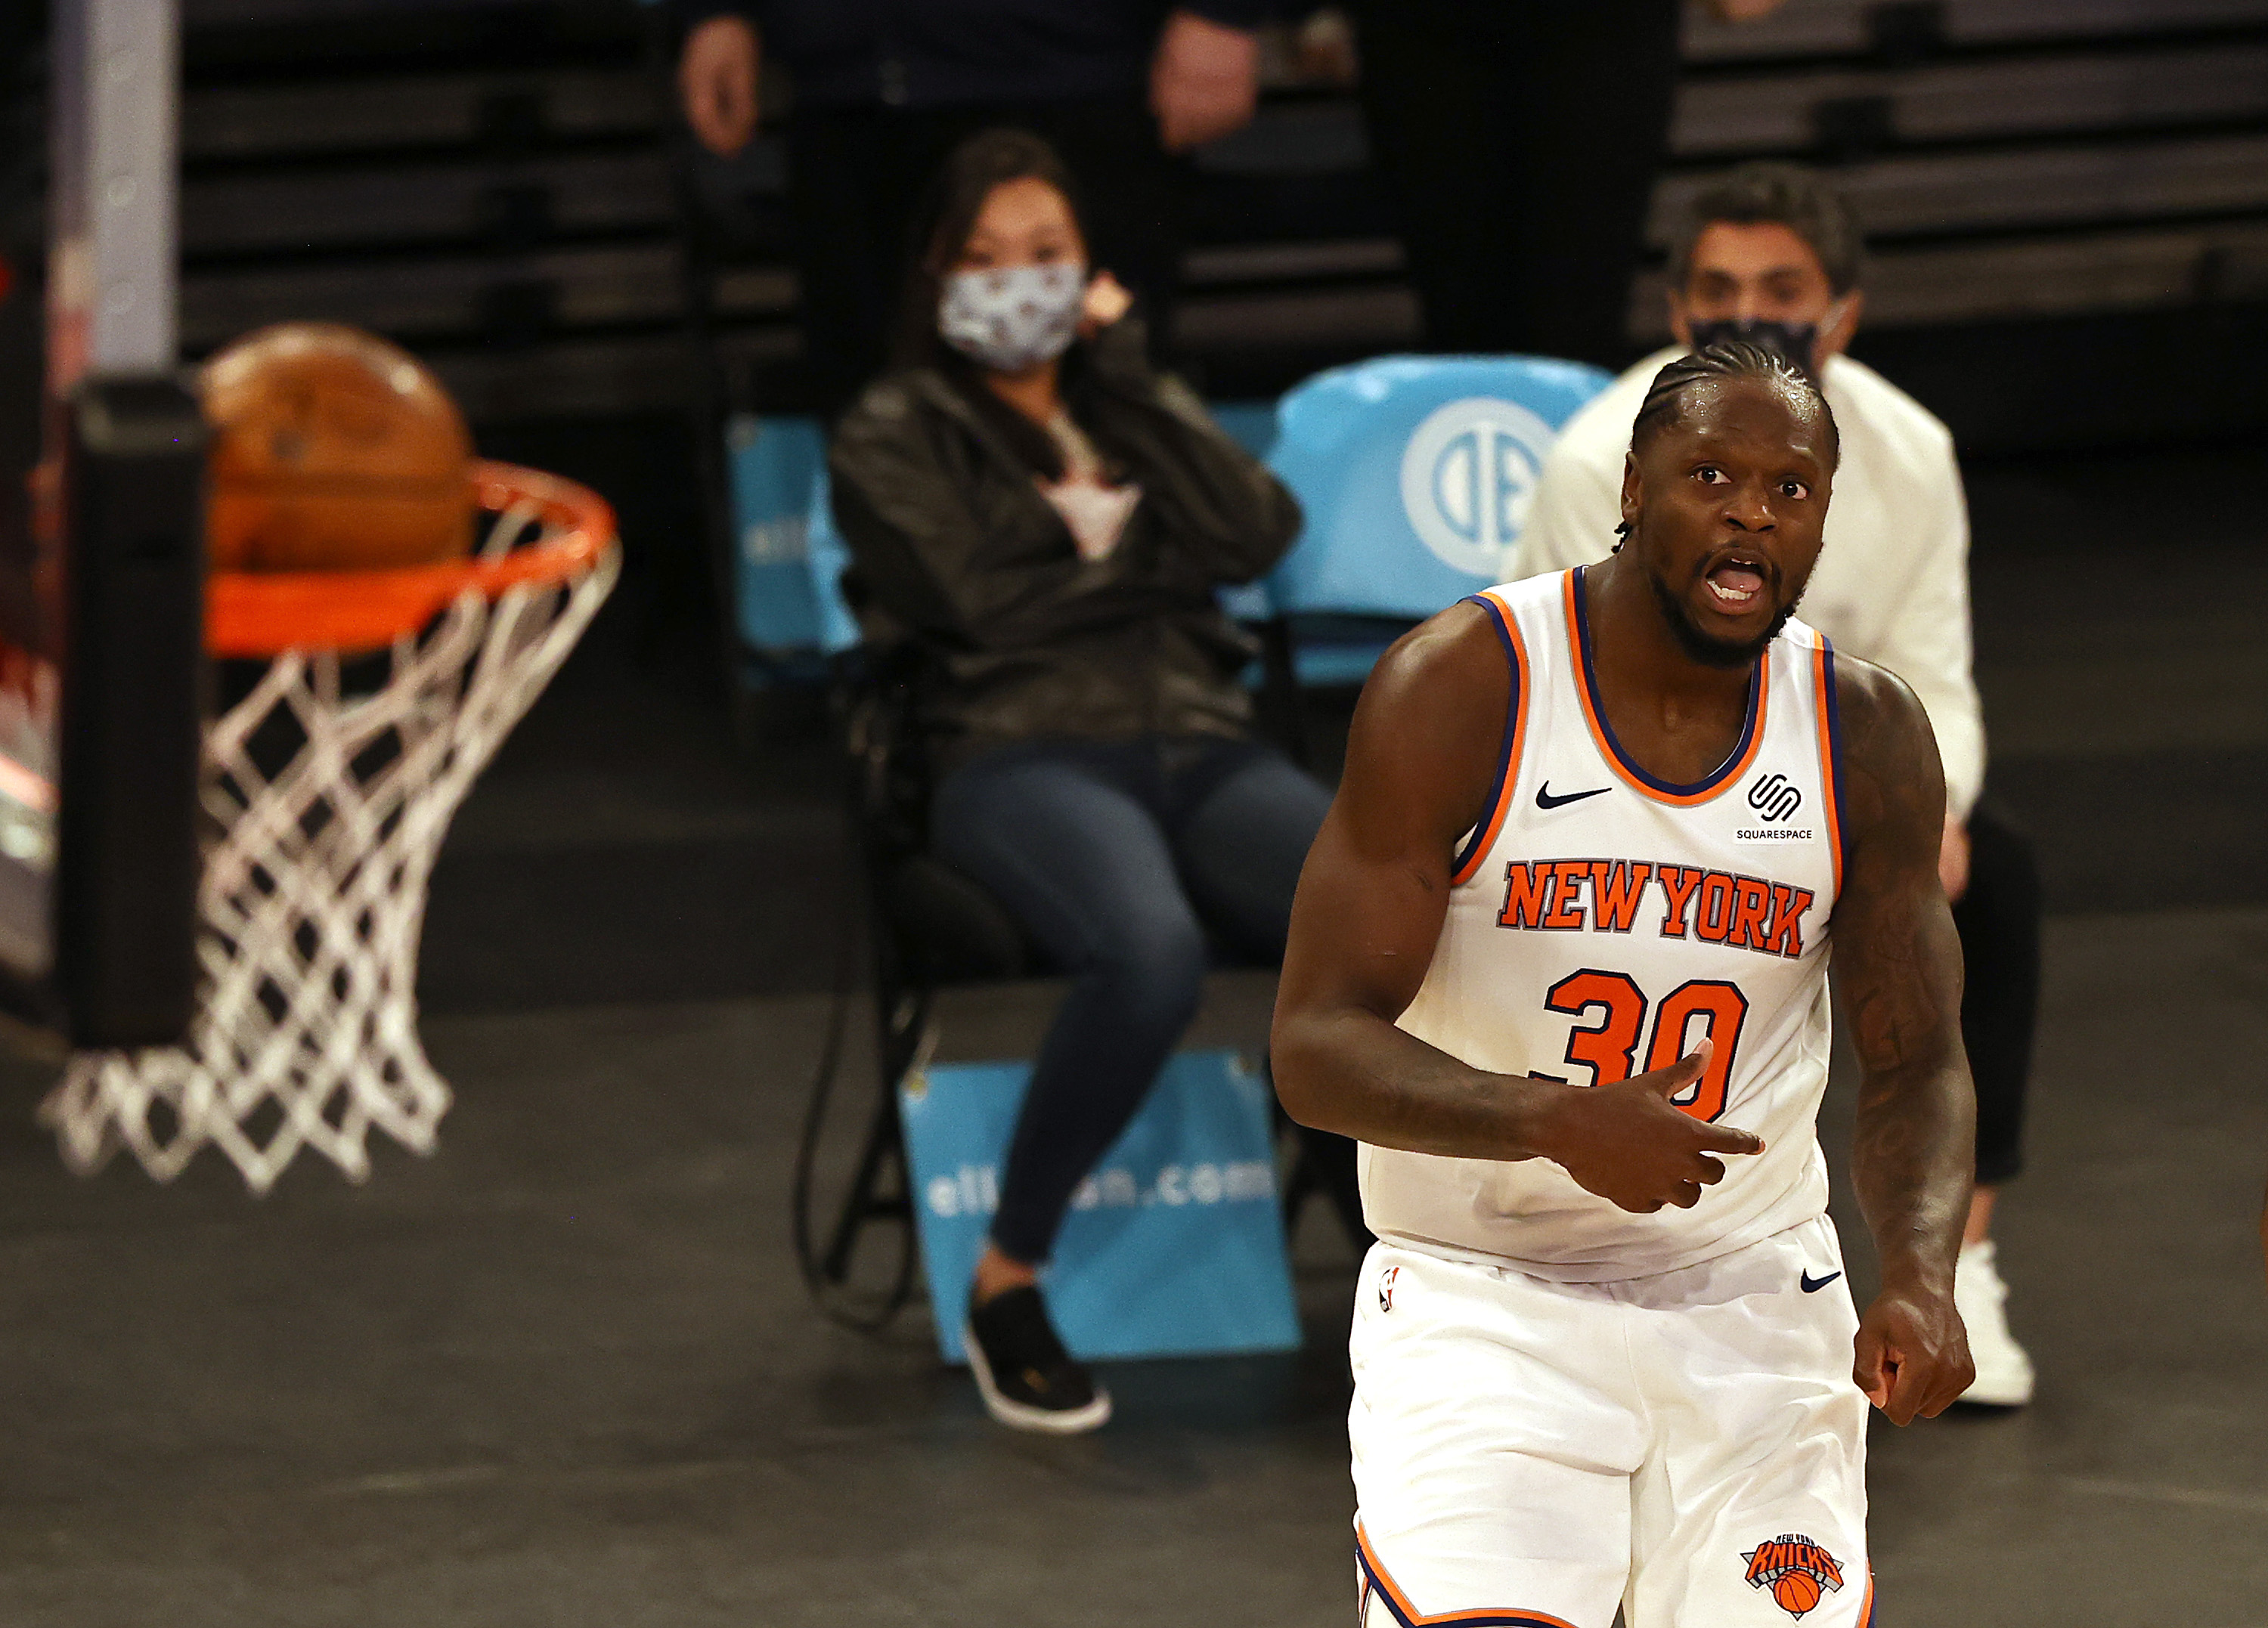 Julius Randle of the Knicks watches his shot.